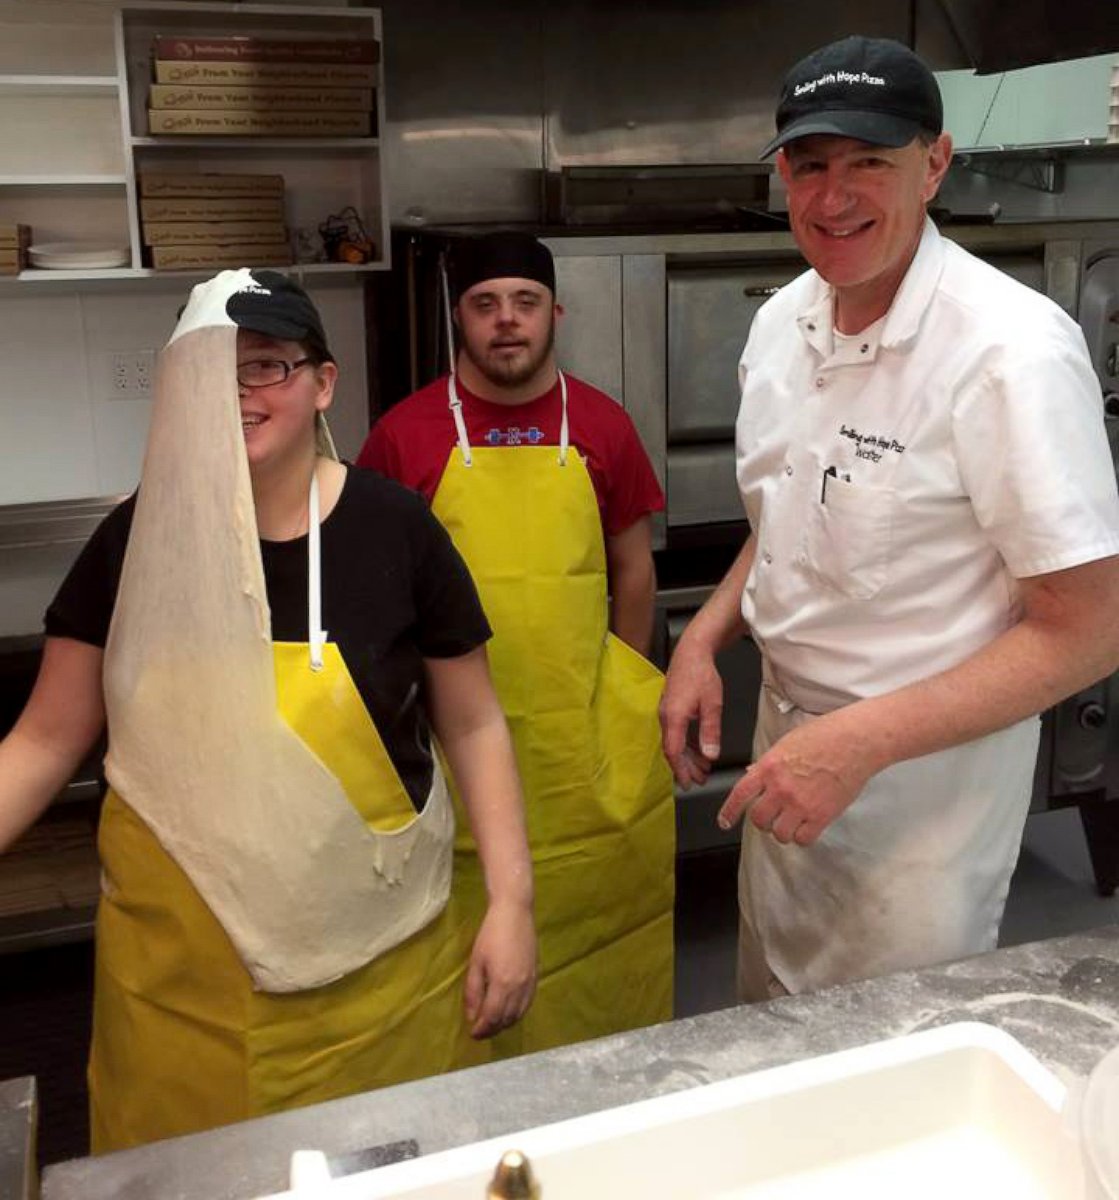 PHOTO: Walter Gloshinski trains employees with developmental disabilities at Smiling With Hope Pizza in Reno, Nevada.